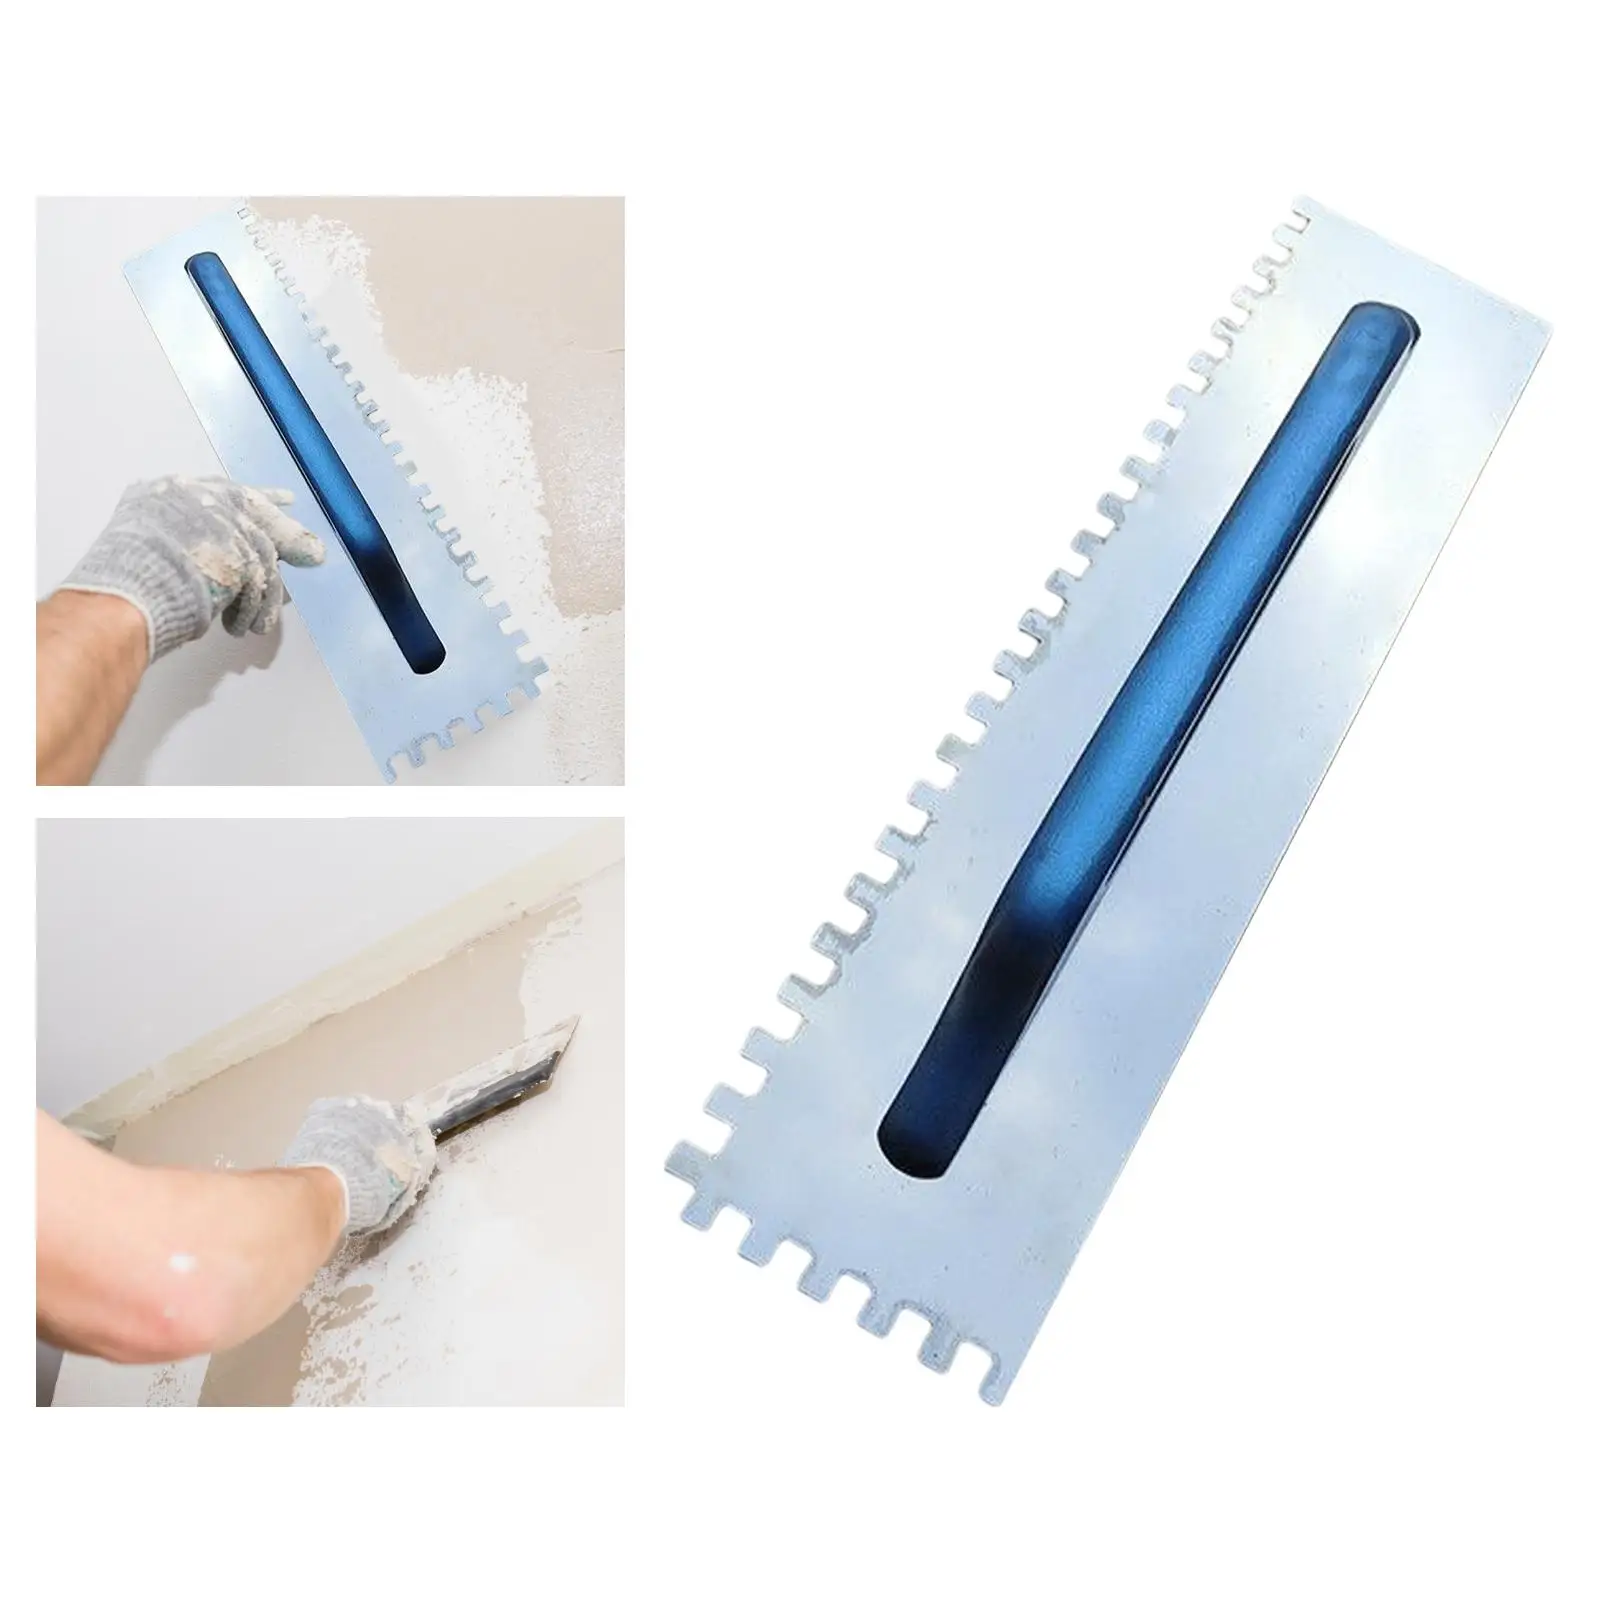 Stainless Steel Drywall Smoothing Spatula Construction Tool Concrete Scraping Tool Plaster Trowel Painting Portable Skimming